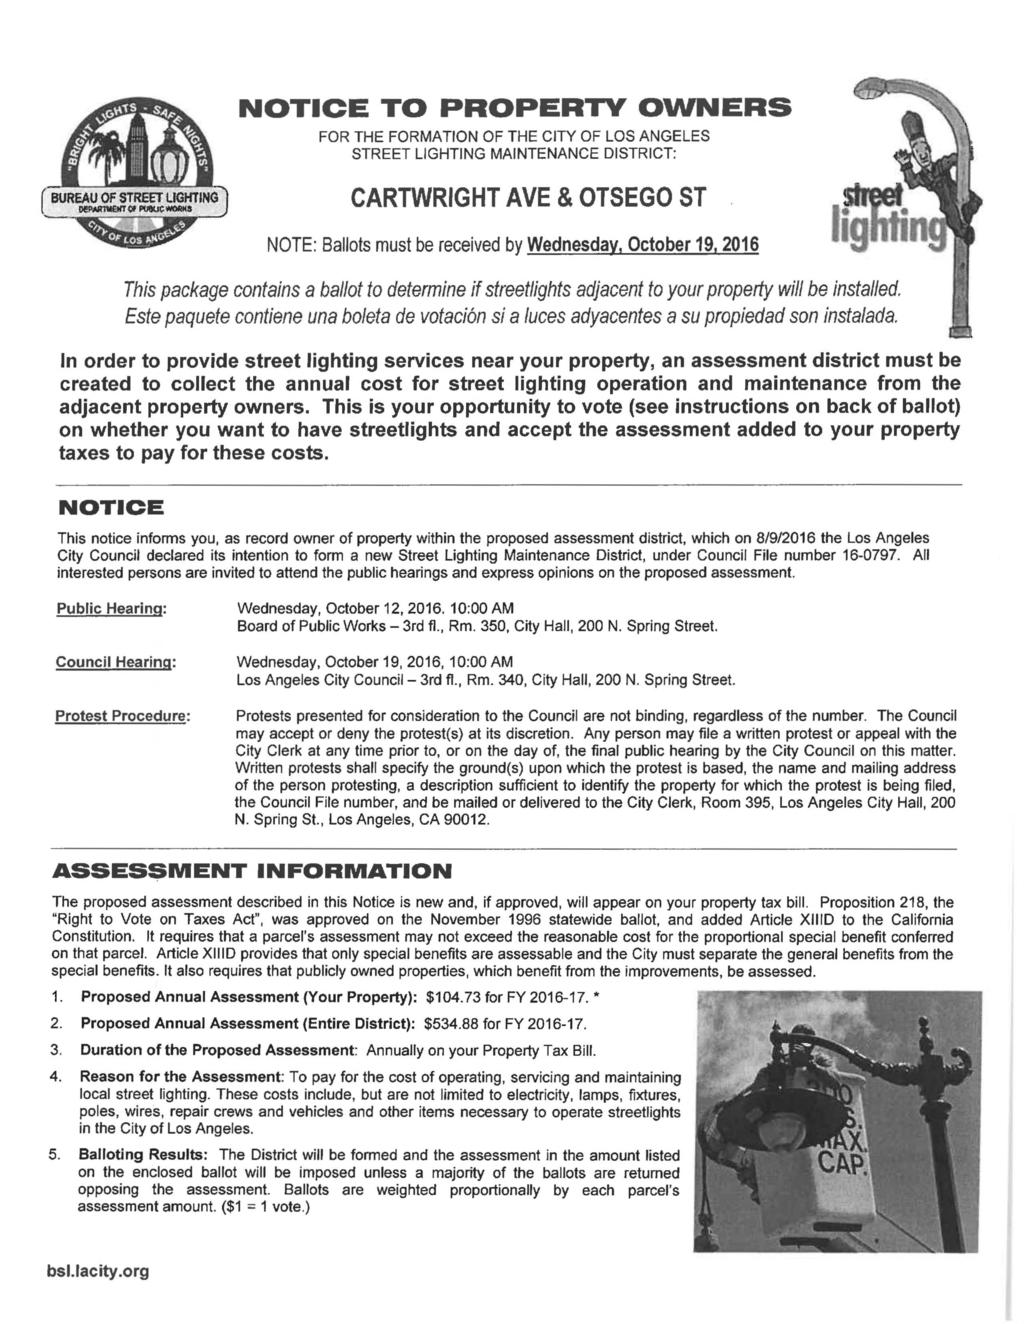 ( BUREAU OF STREET LIGHTING l «part»i trc«i»u#u<;yw>rii* NOTICE TO PROPERTY OWNERS FOR THE FORMATION OF THE CITY OF LOS ANGELES STREET LIGHTING MAINTENANCE DISTRICT: CARTWRIGHT AVE & OTSEGO ST NOTE: